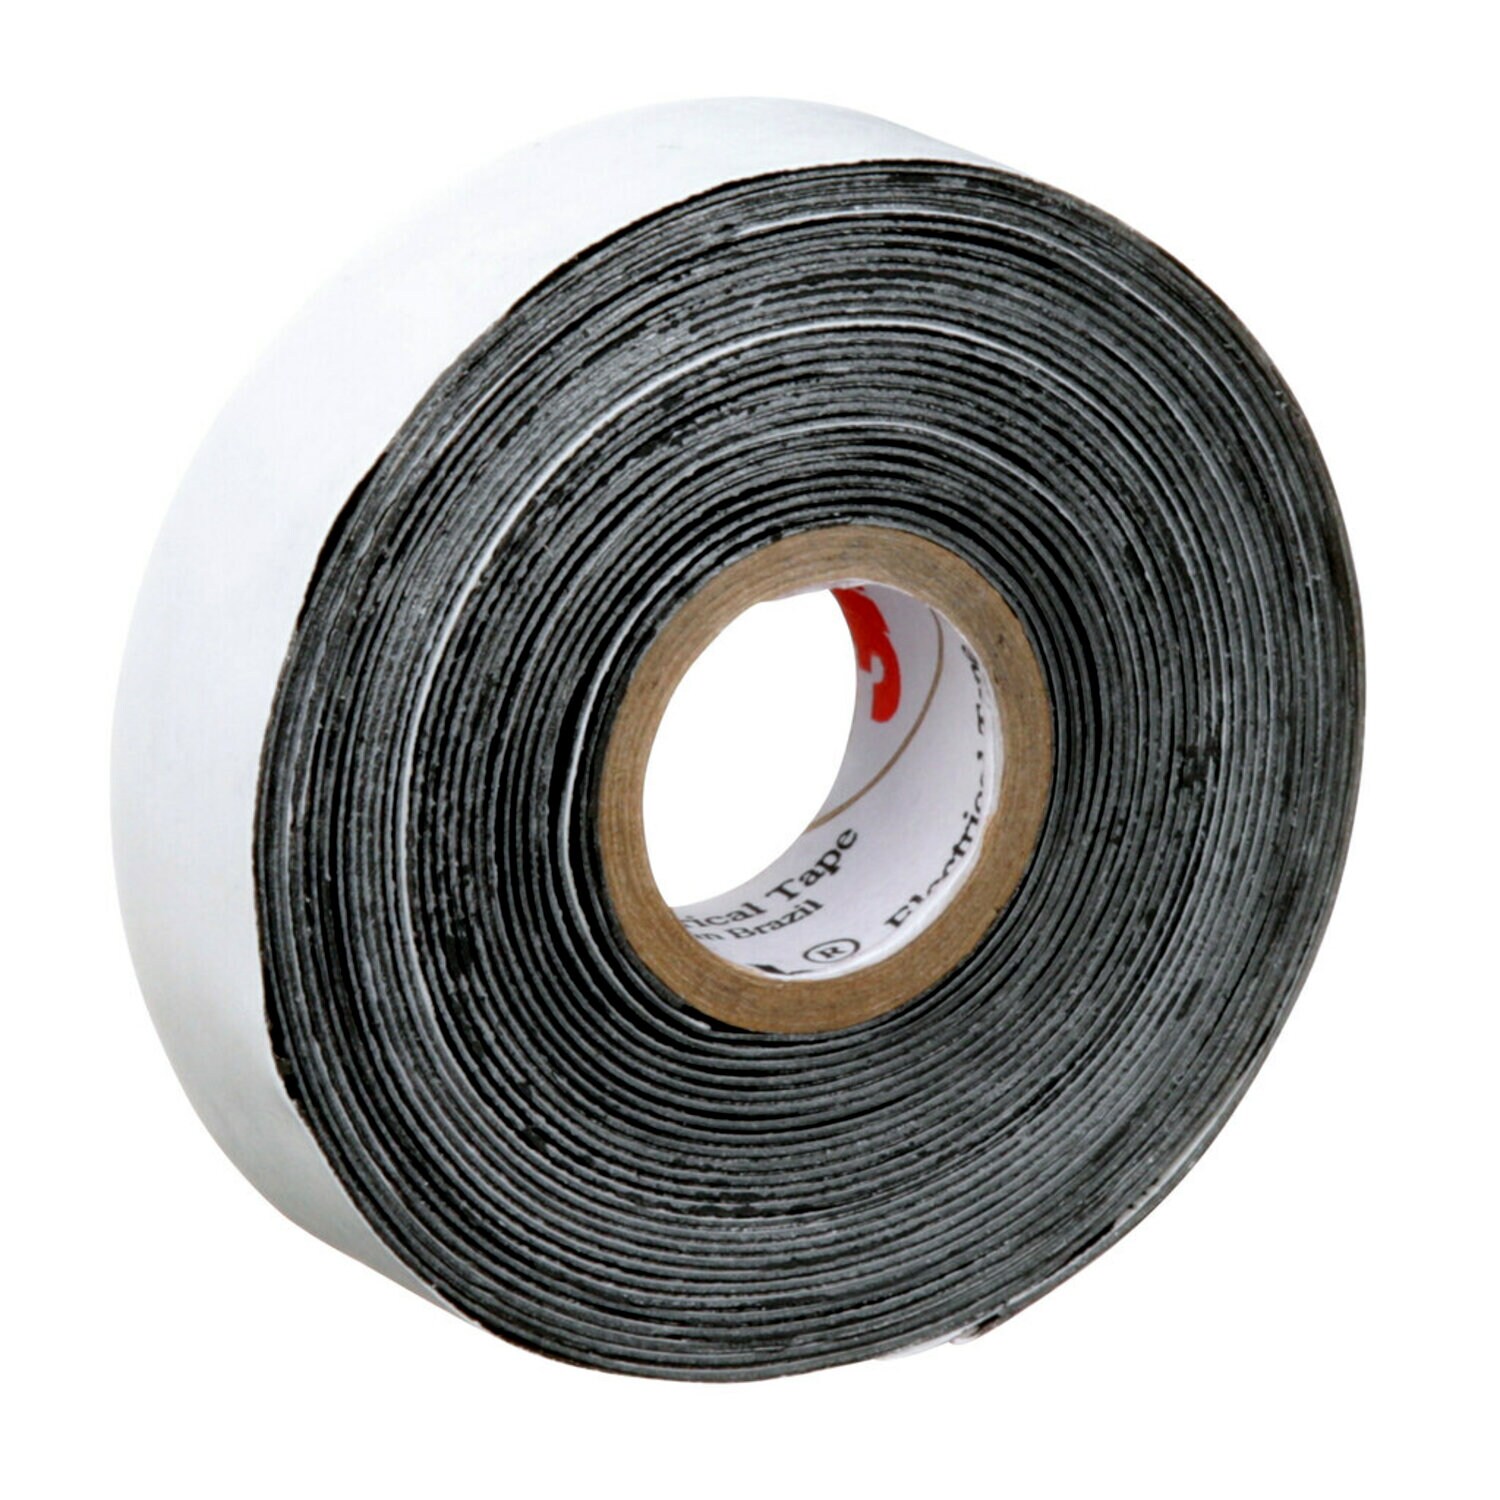 7000034806 - Scotch Electrical Stress Control Tape 2220, 3/4 in x 15 ft, Gray, 100
rolls/Case